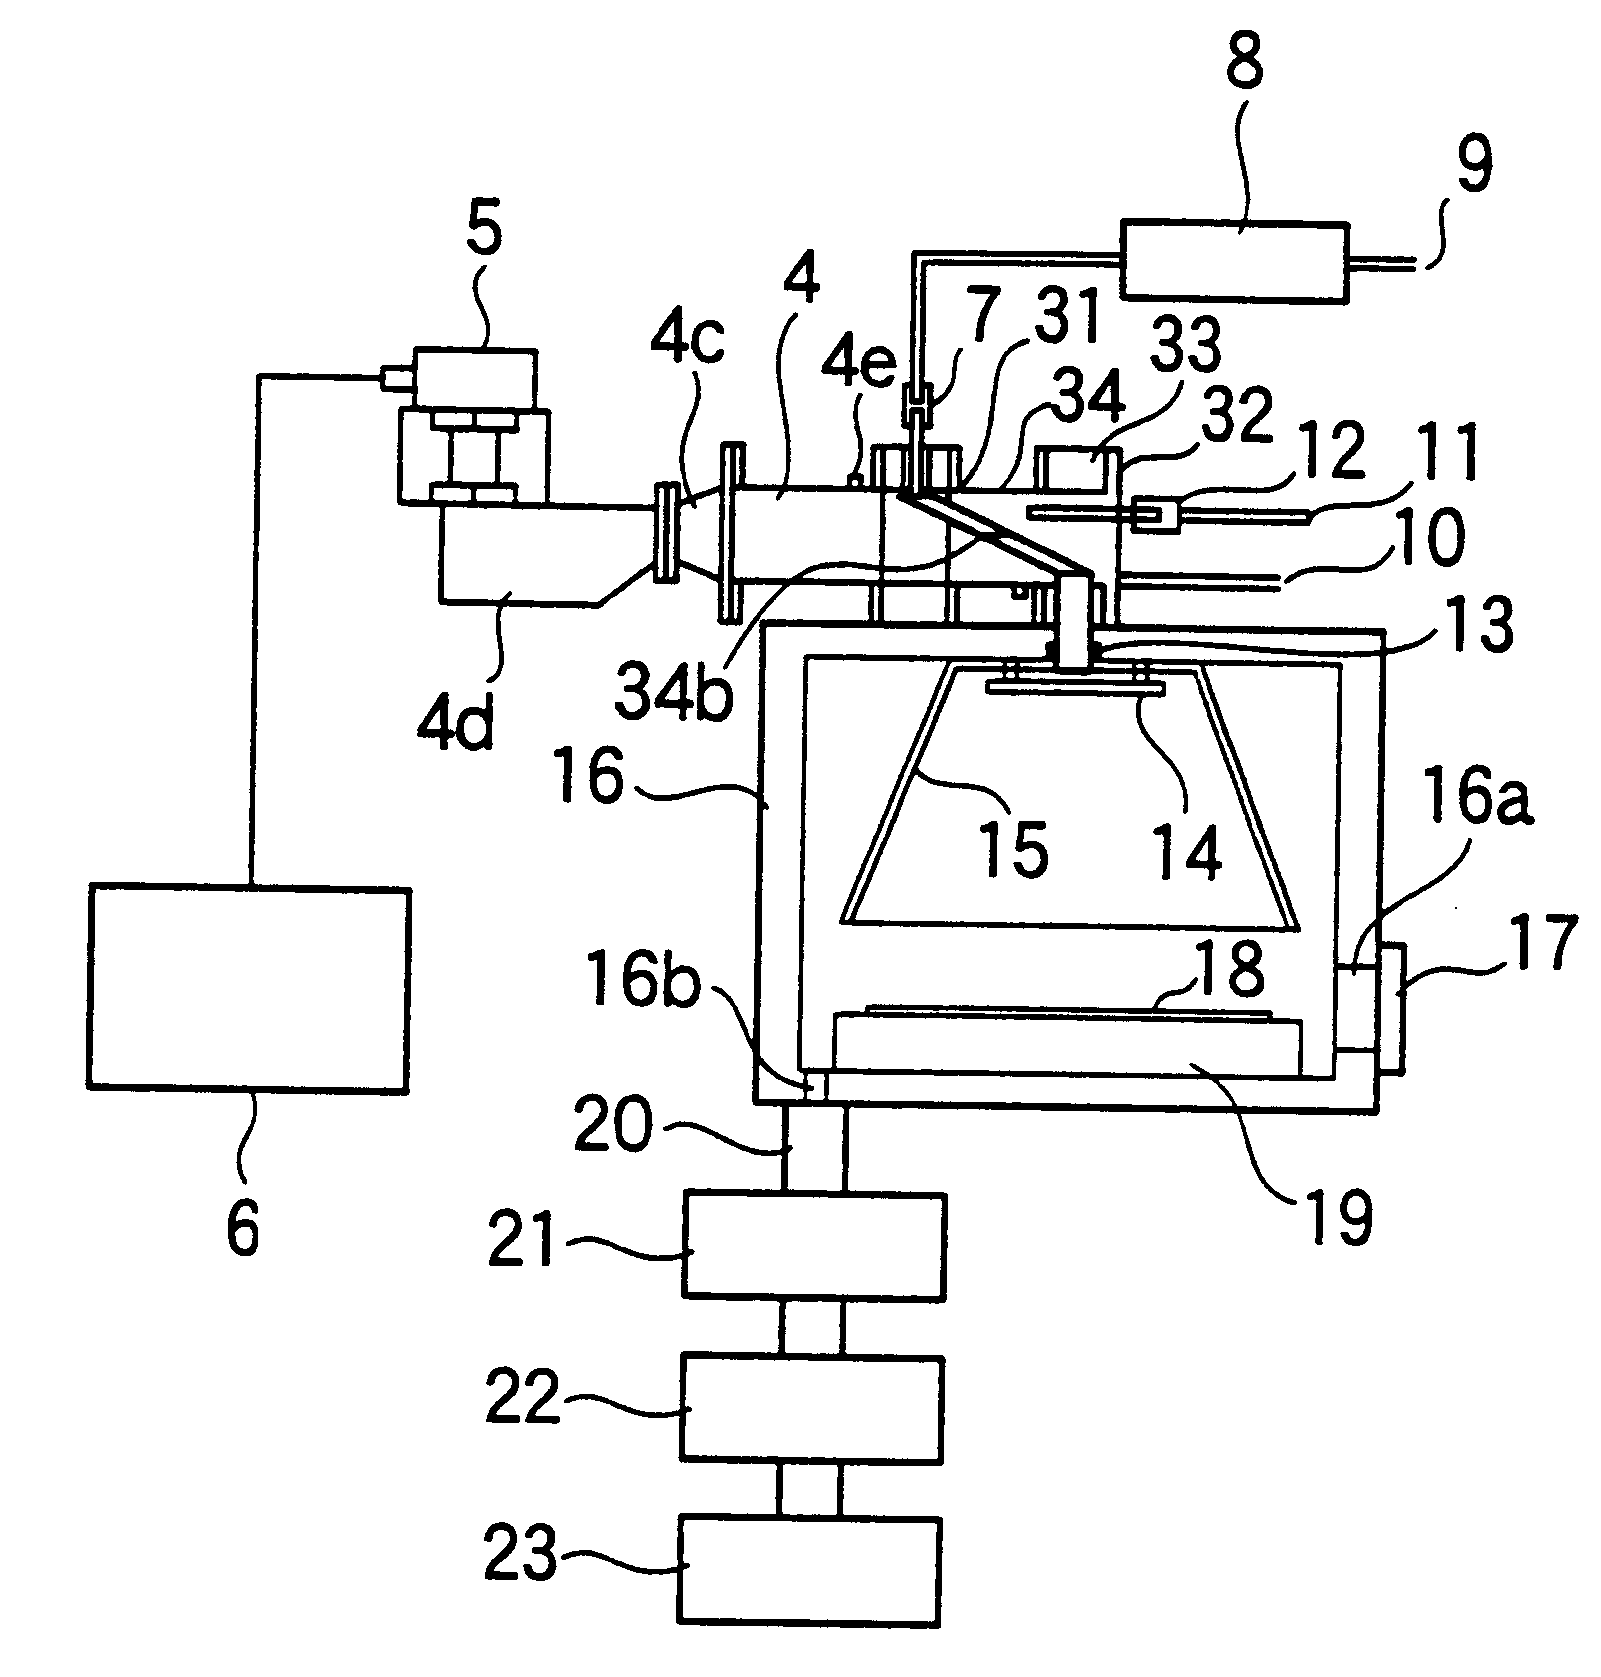 Microwave discharge apparatus